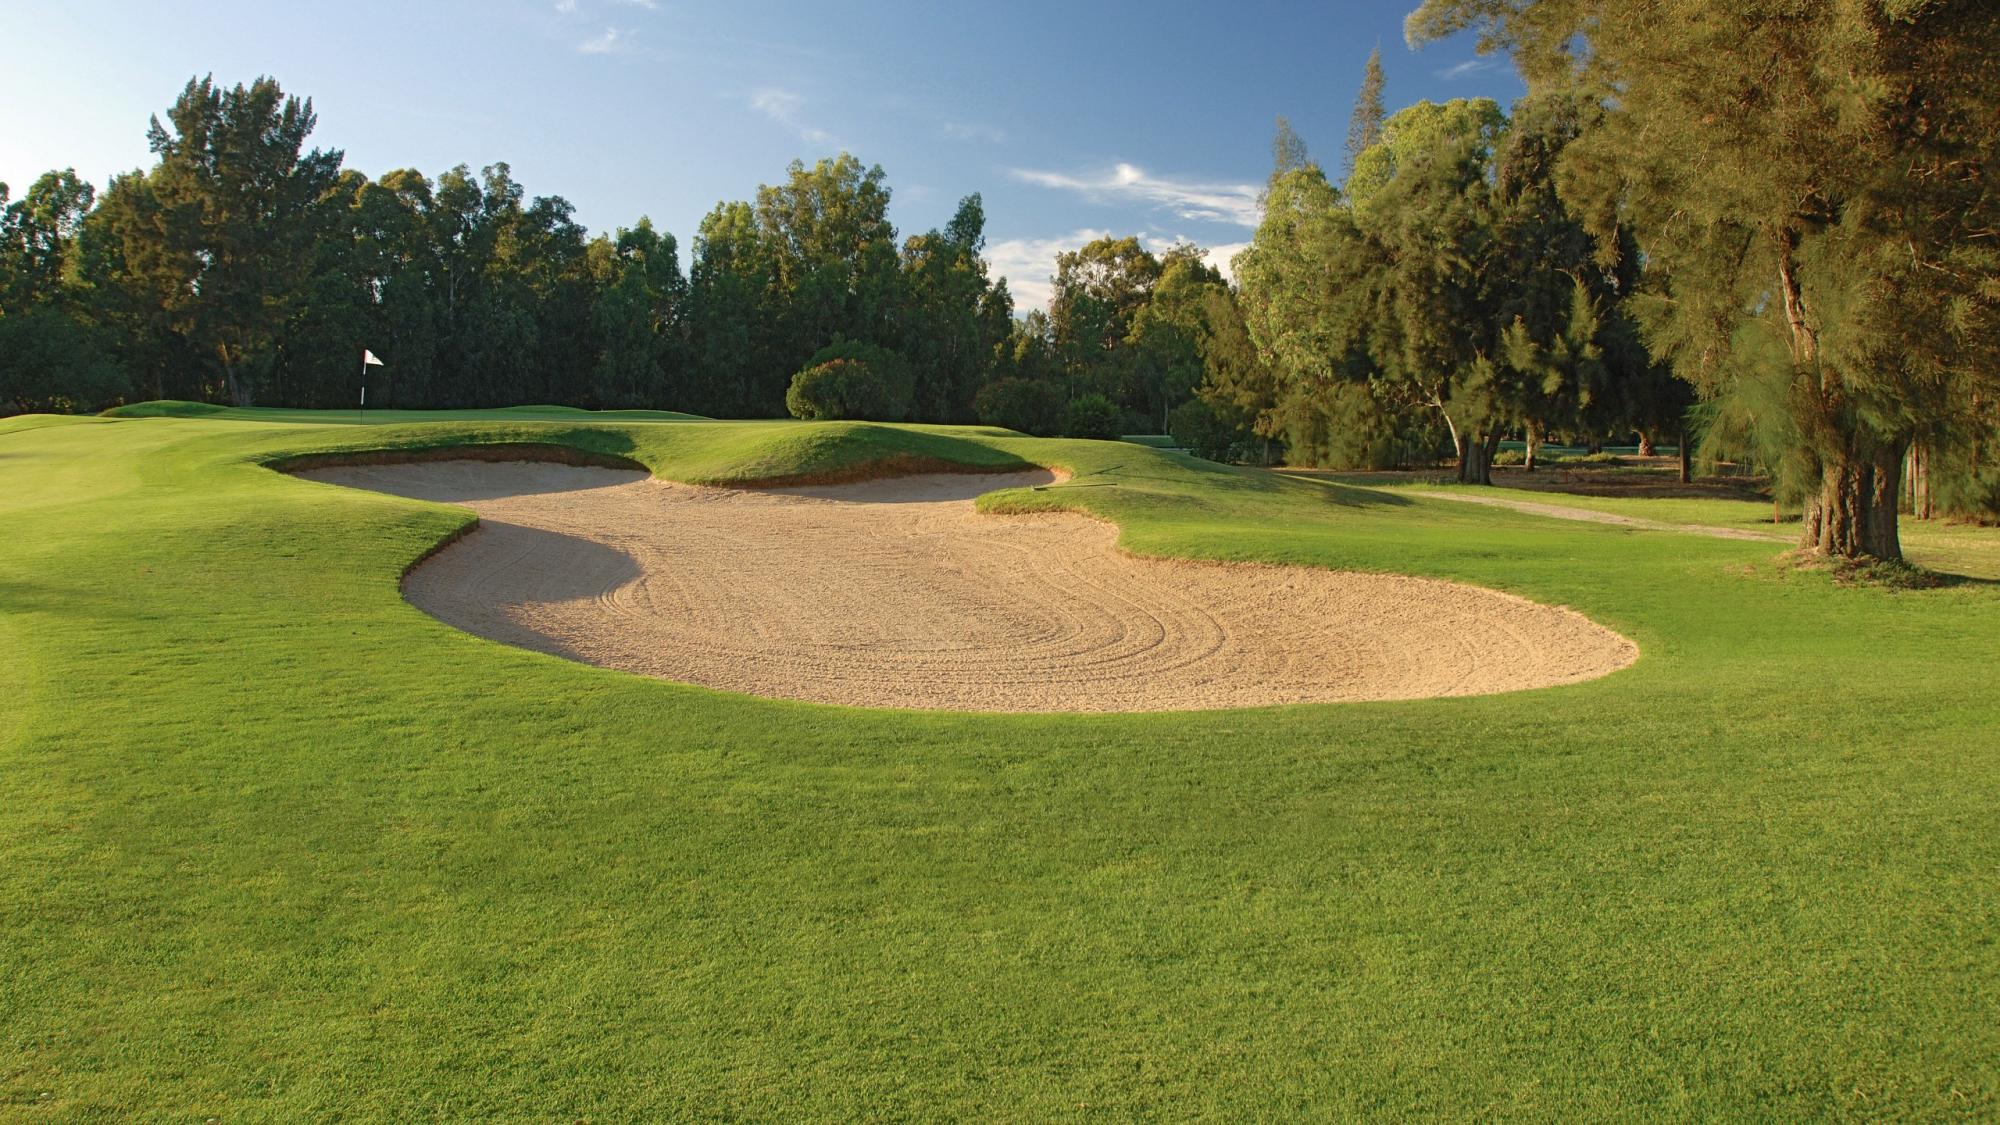 Penina Championship Course hosts lots of the best golf course within Algarve